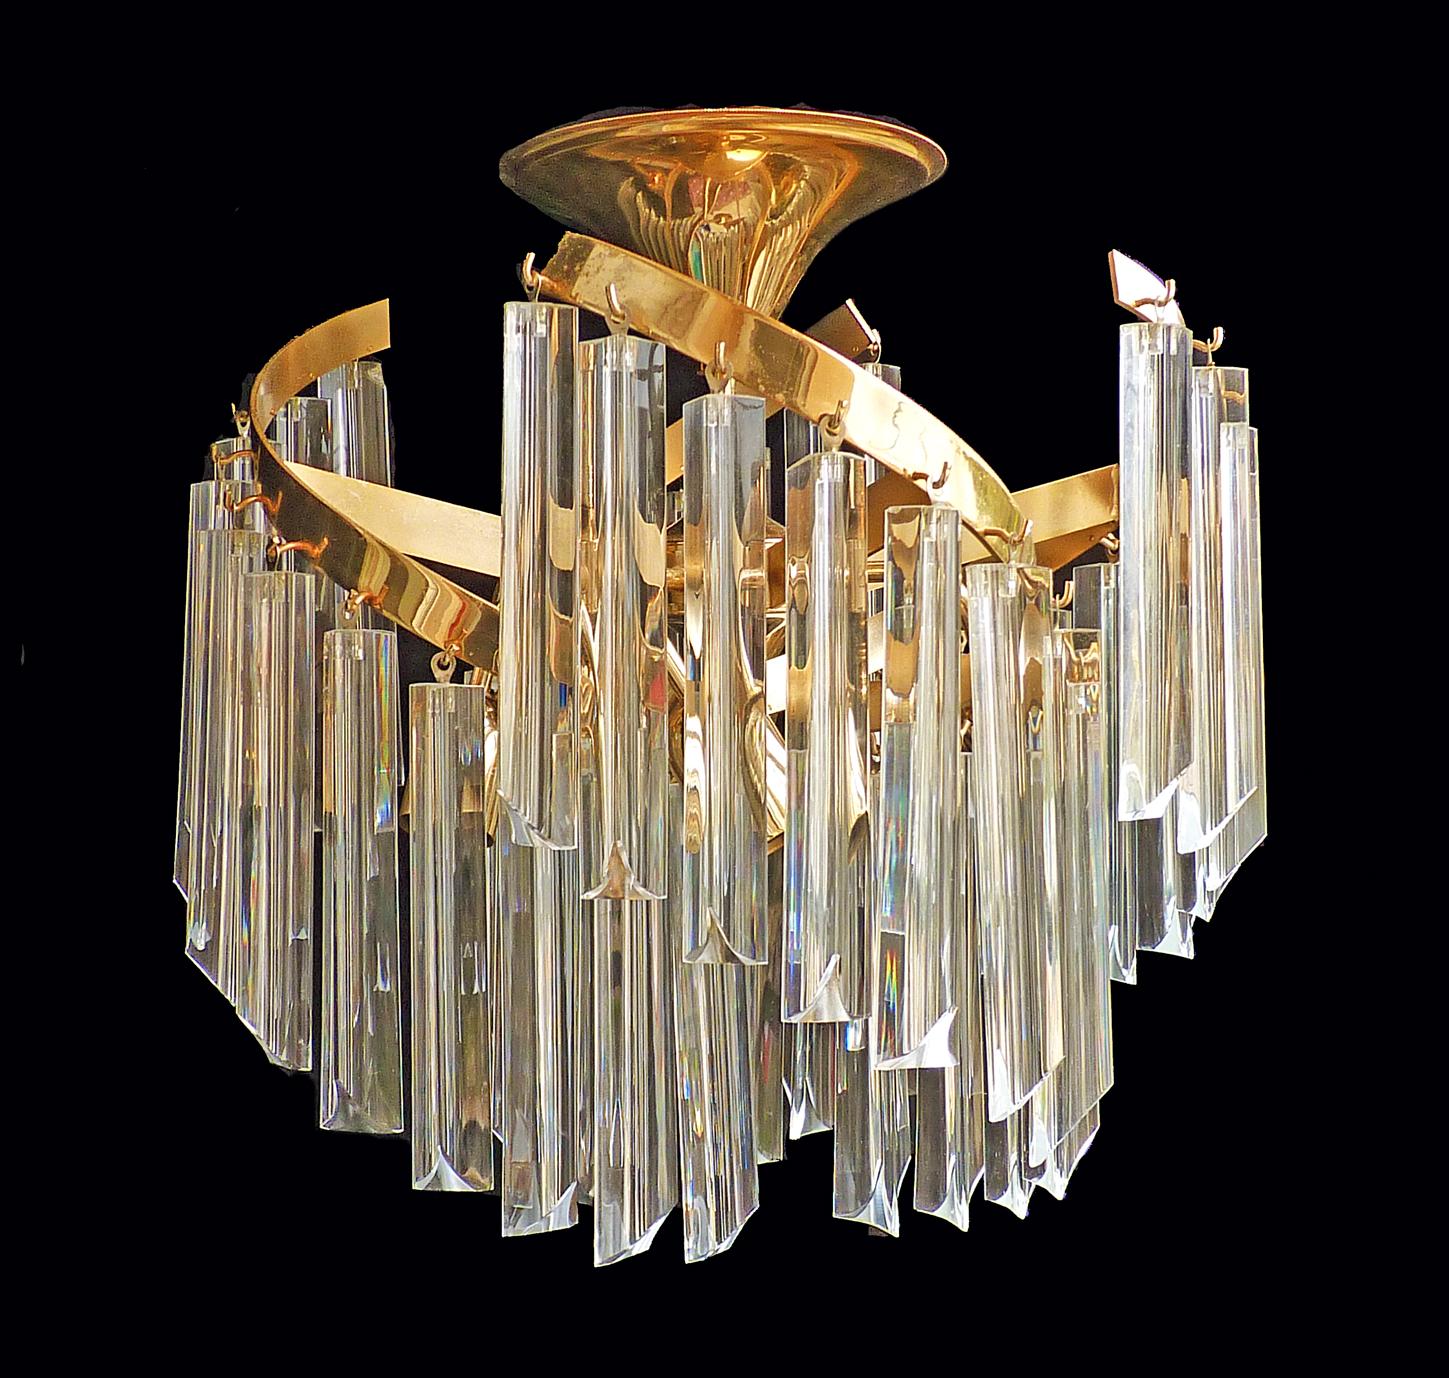 1970s vintage midcentury Italian Murano spiral Venini Camer Triedi clear crystal prism and gold-plated brass chandelier
Measures:
Diameter 20 in/ 50 cm
Height 20 in/ 50 cm
Weight: 22 lb/10 Kg
4 light bulbs E-27/ 60 W, good working condition
Assembly